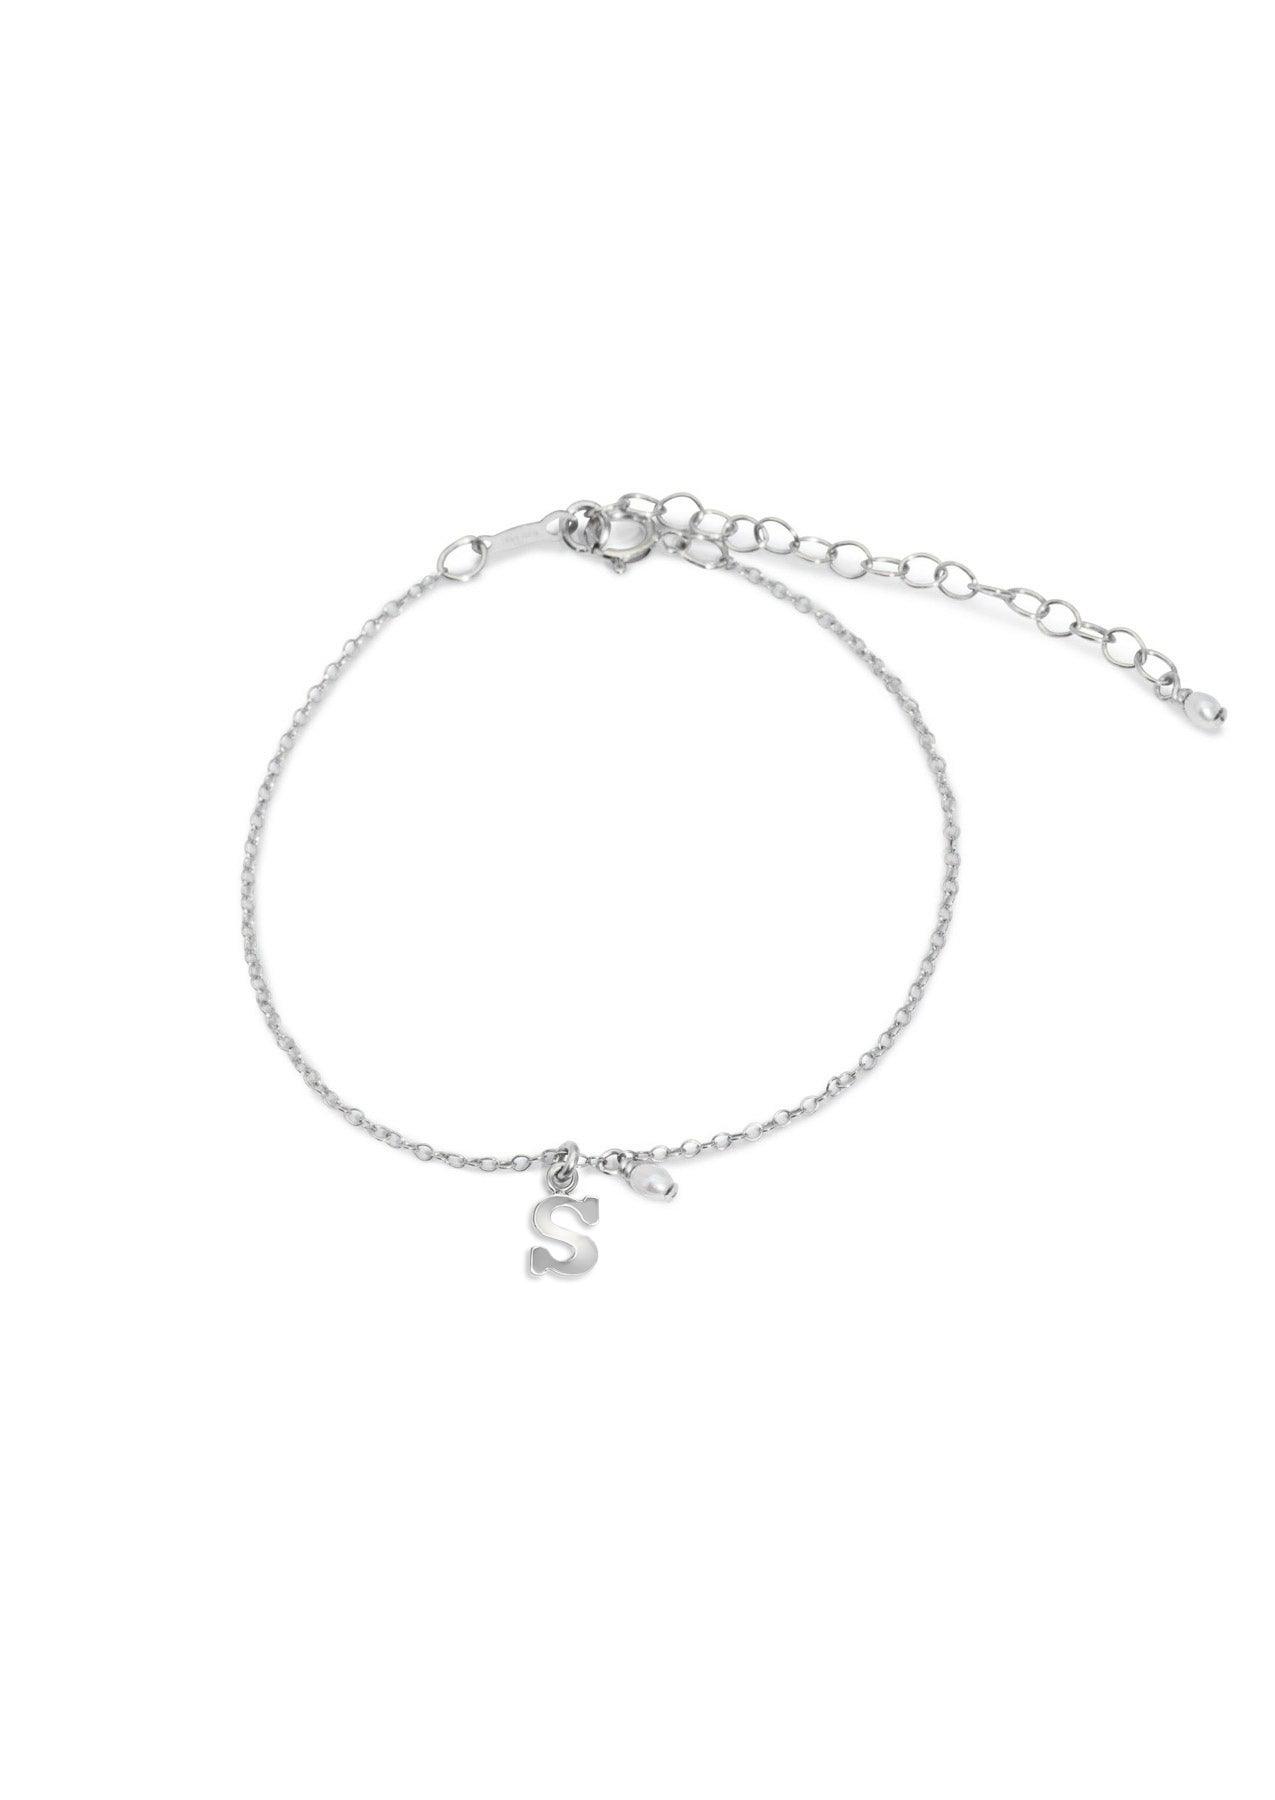 The Initial Silver Charm Bracelet - Molten Store